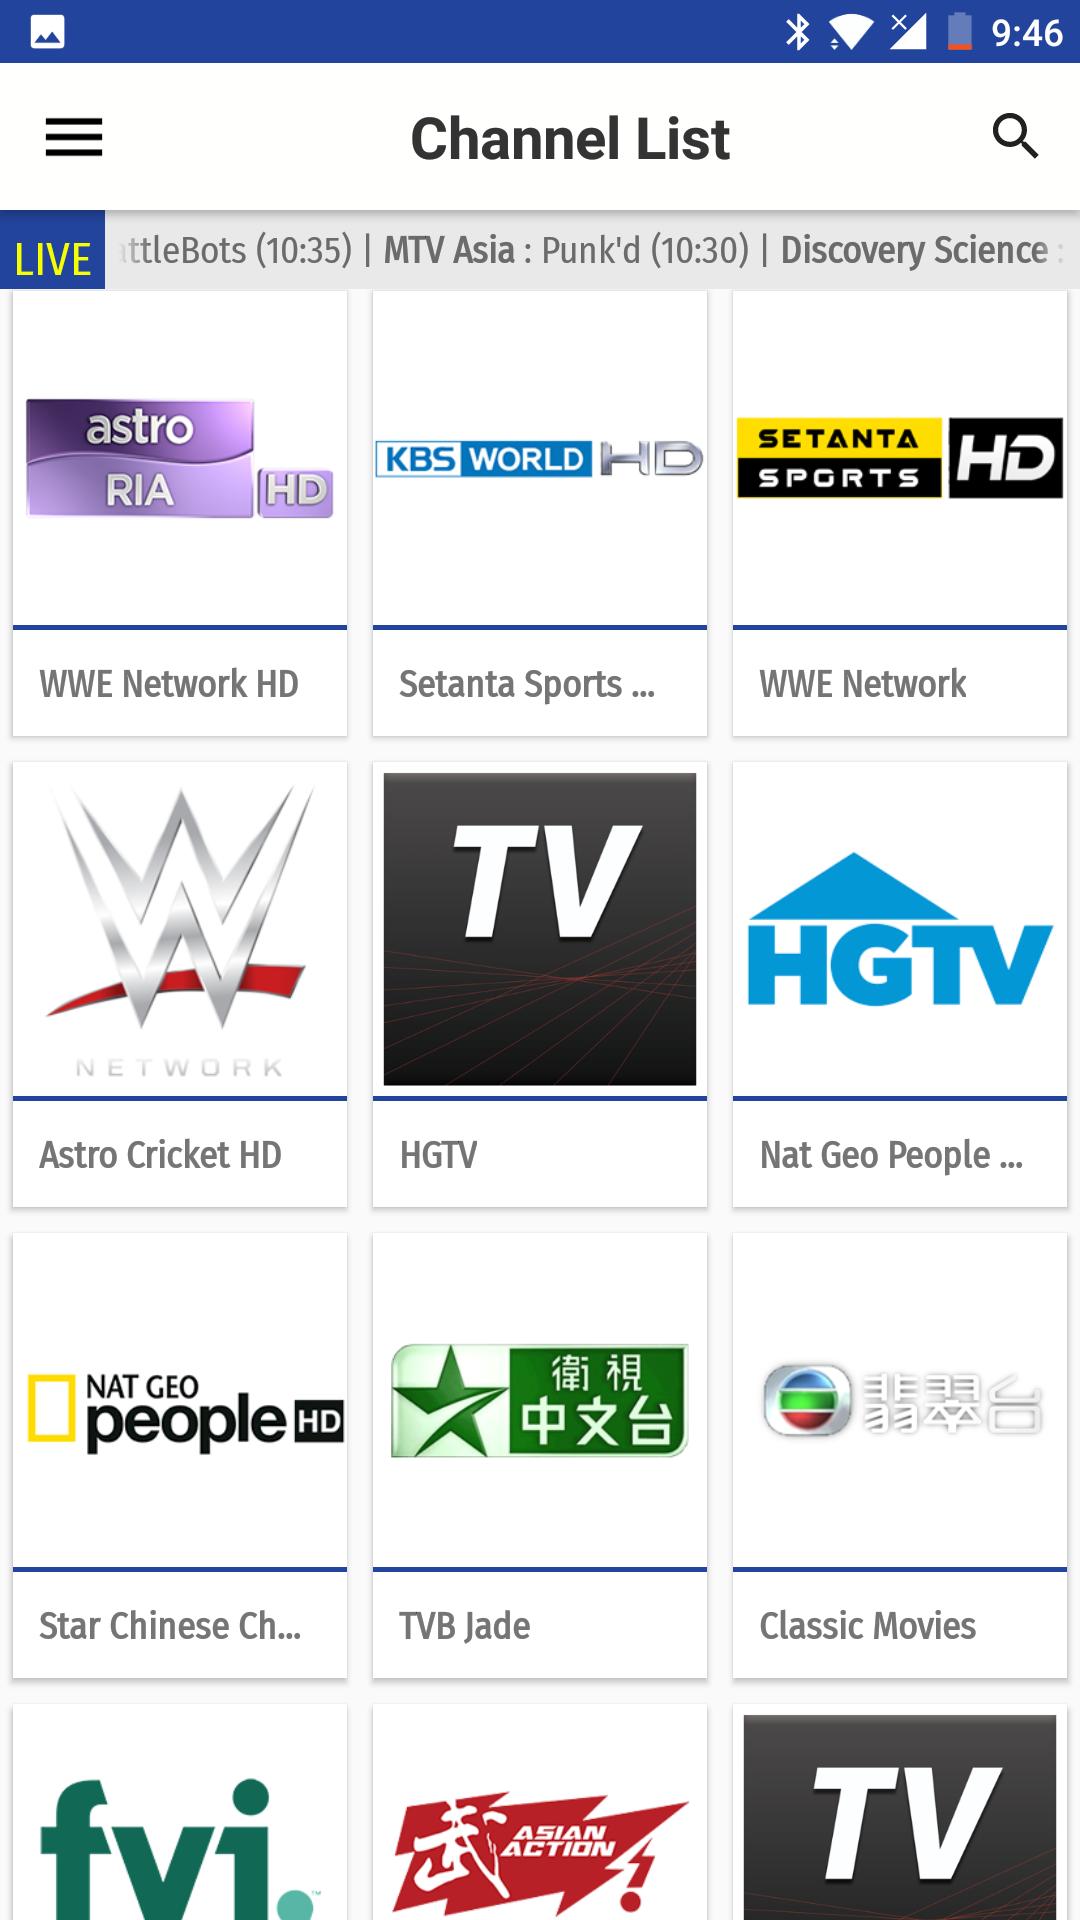 Astro Warna Hd Channel / Astro quanjia hd is the second chinese hd